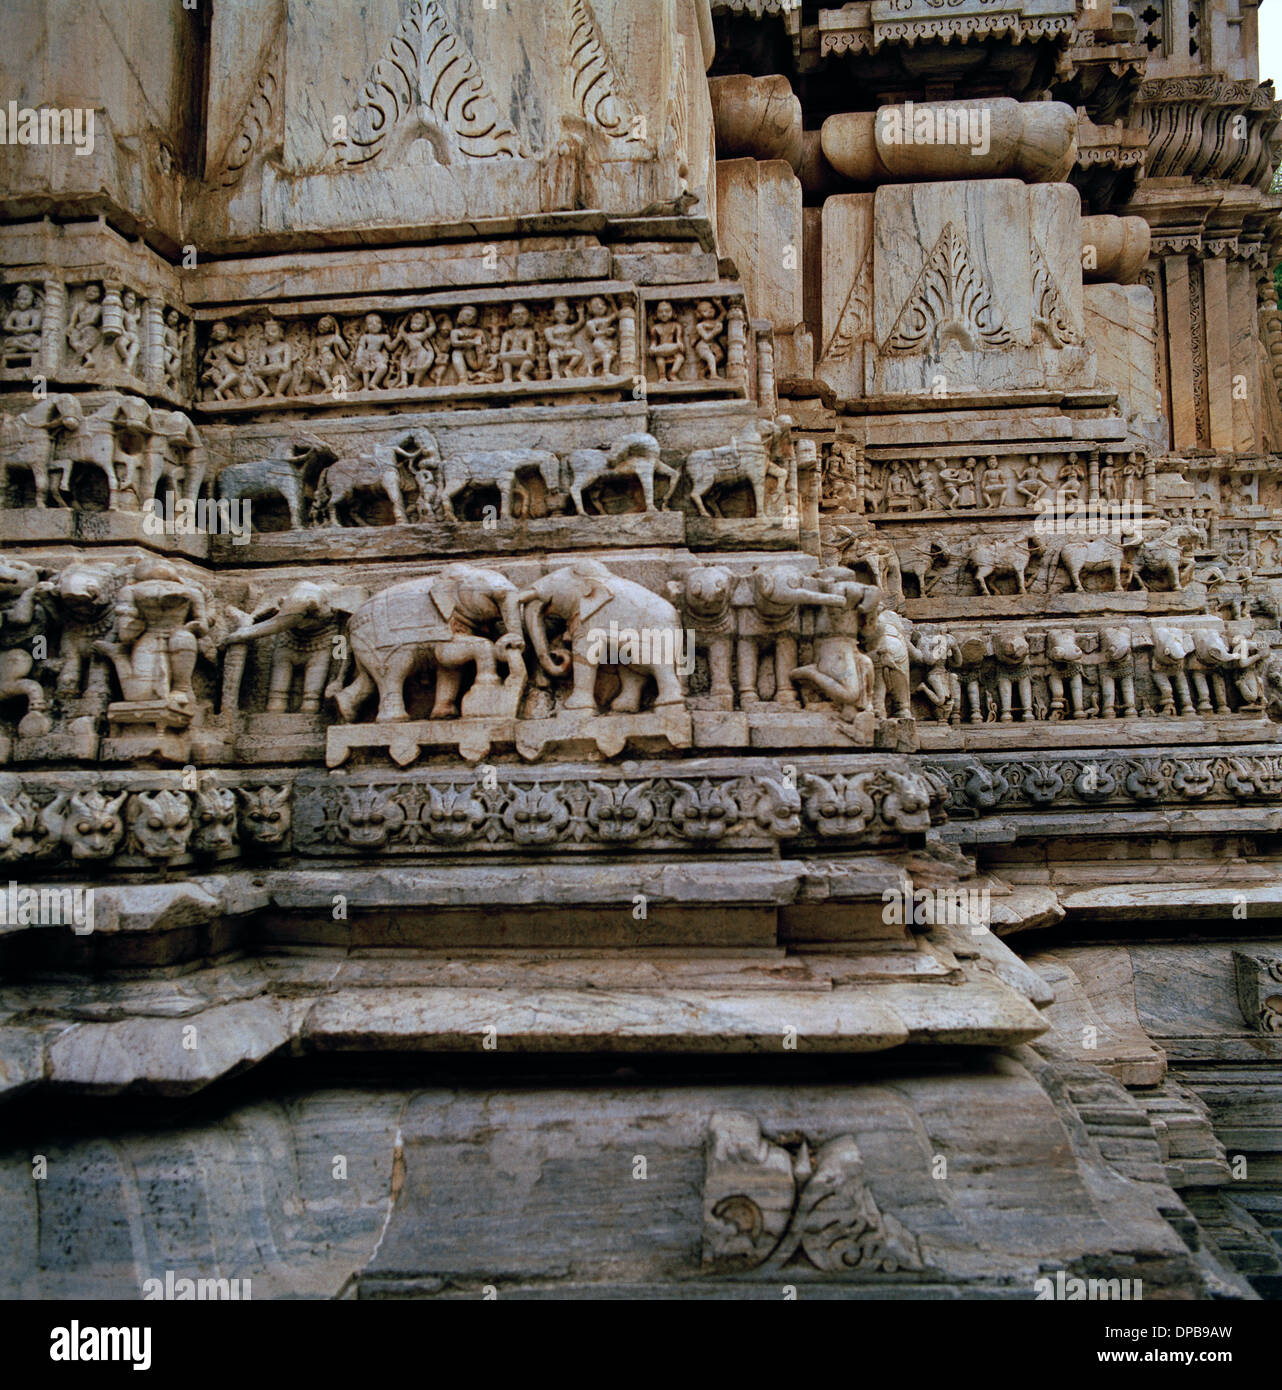 Sculpture art at the Jagdish Temple in Udaipur in Rajasthan in India in South Asia. Architecture Elephant Building Travel Culture History Wanderlust Stock Photo